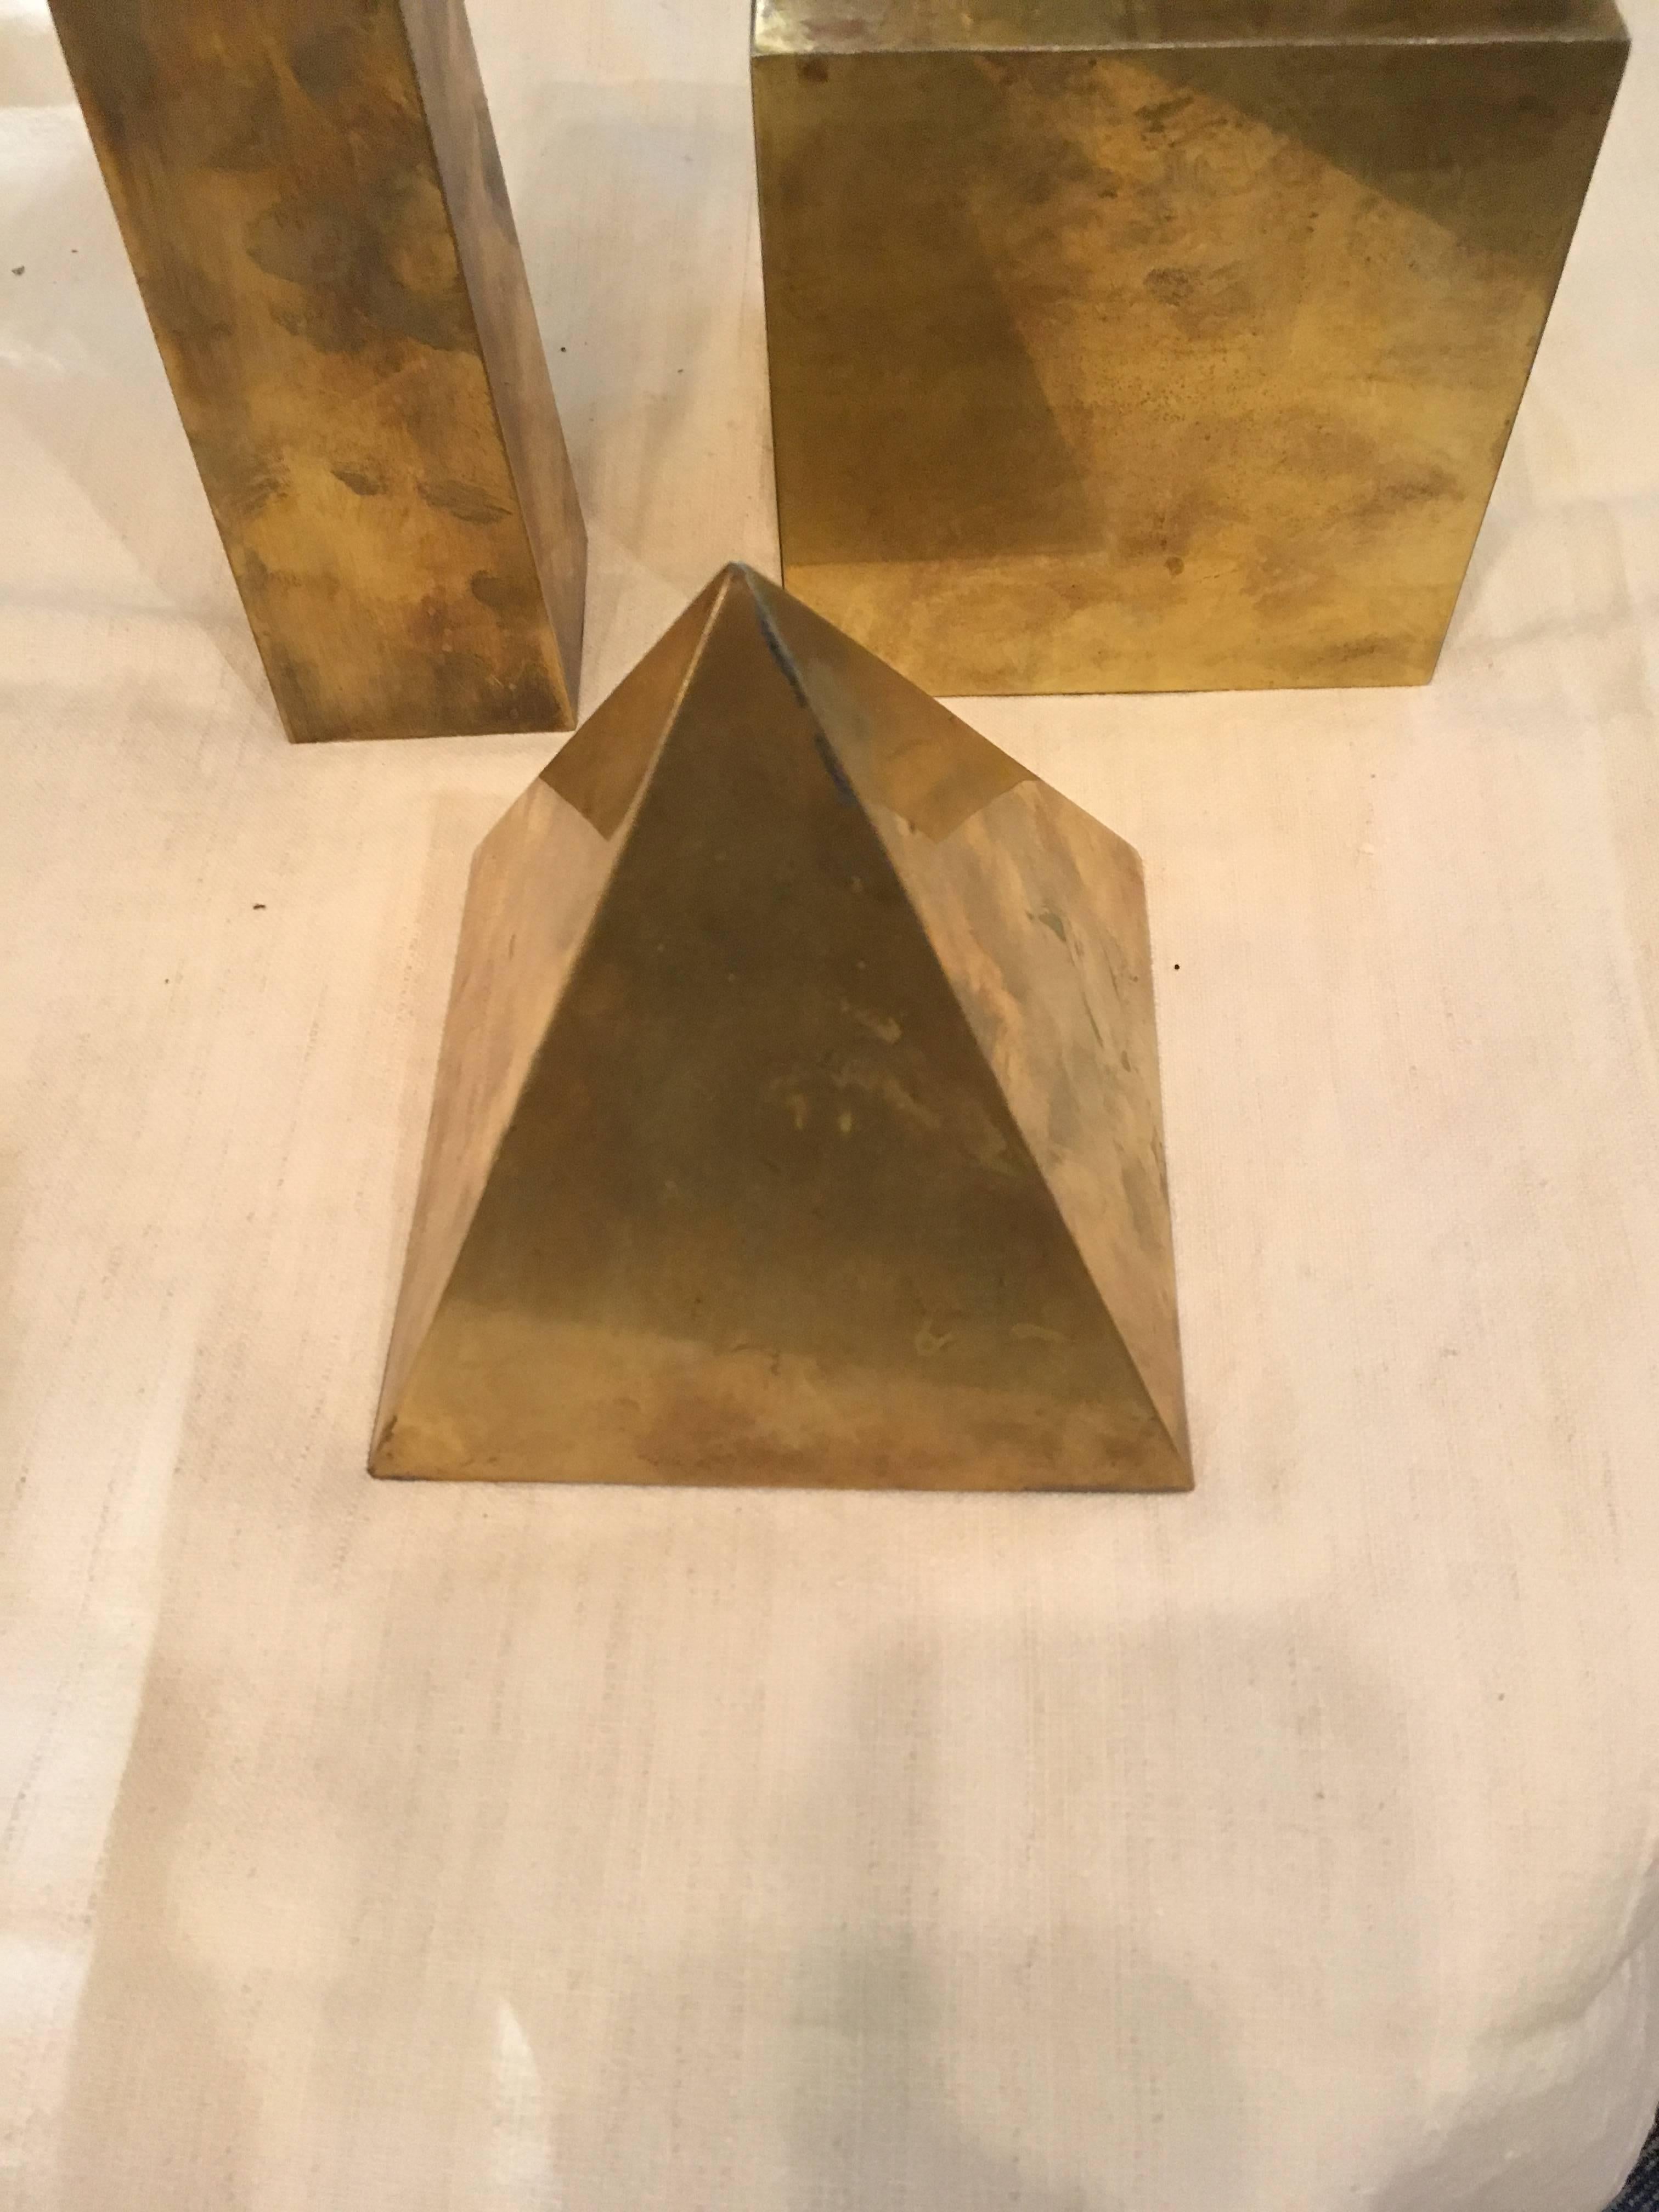 Set of three brass decorative forms. Great as a collection or string enough each in its own 
Measures: Obelisk is 14.5 tall x 2.5 x 2.5
Cube is 5.5 x 5.5 x 5.5
Pyramid is 5.25 x 5.25 x 6.